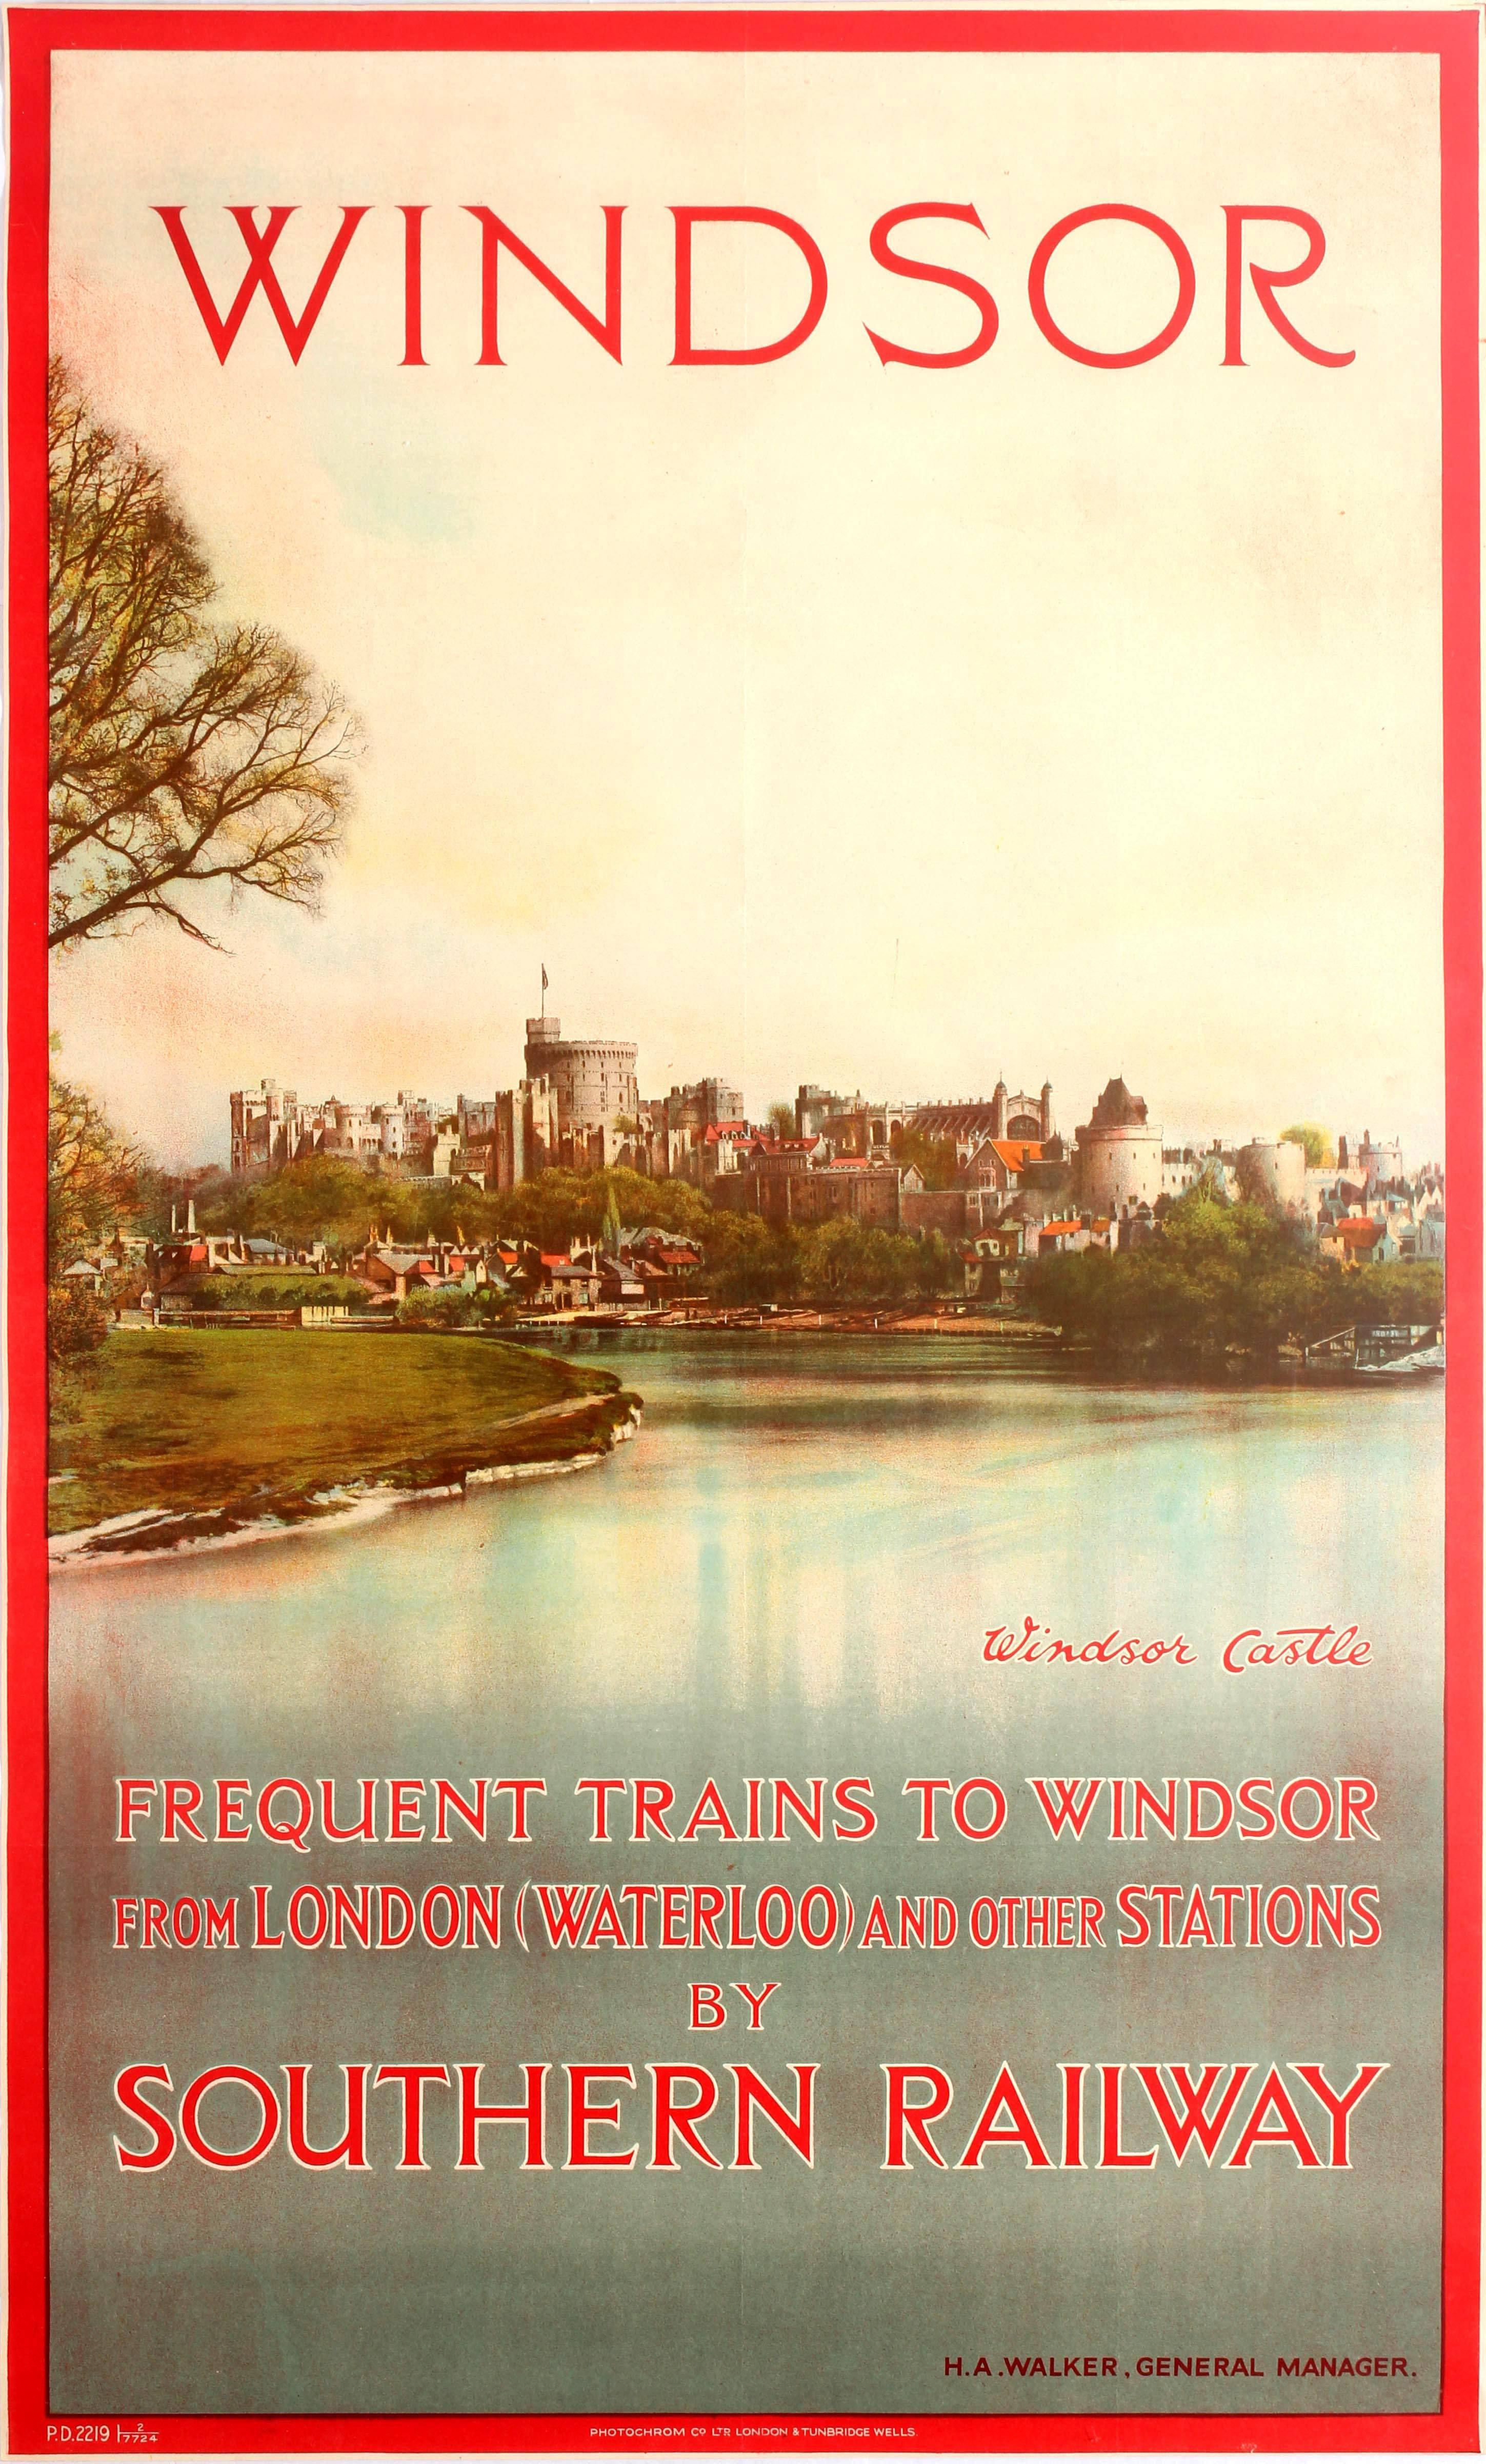 Unknown Print - Original Vintage Southern Railway Travel Poster Featuring Windsor Castle England